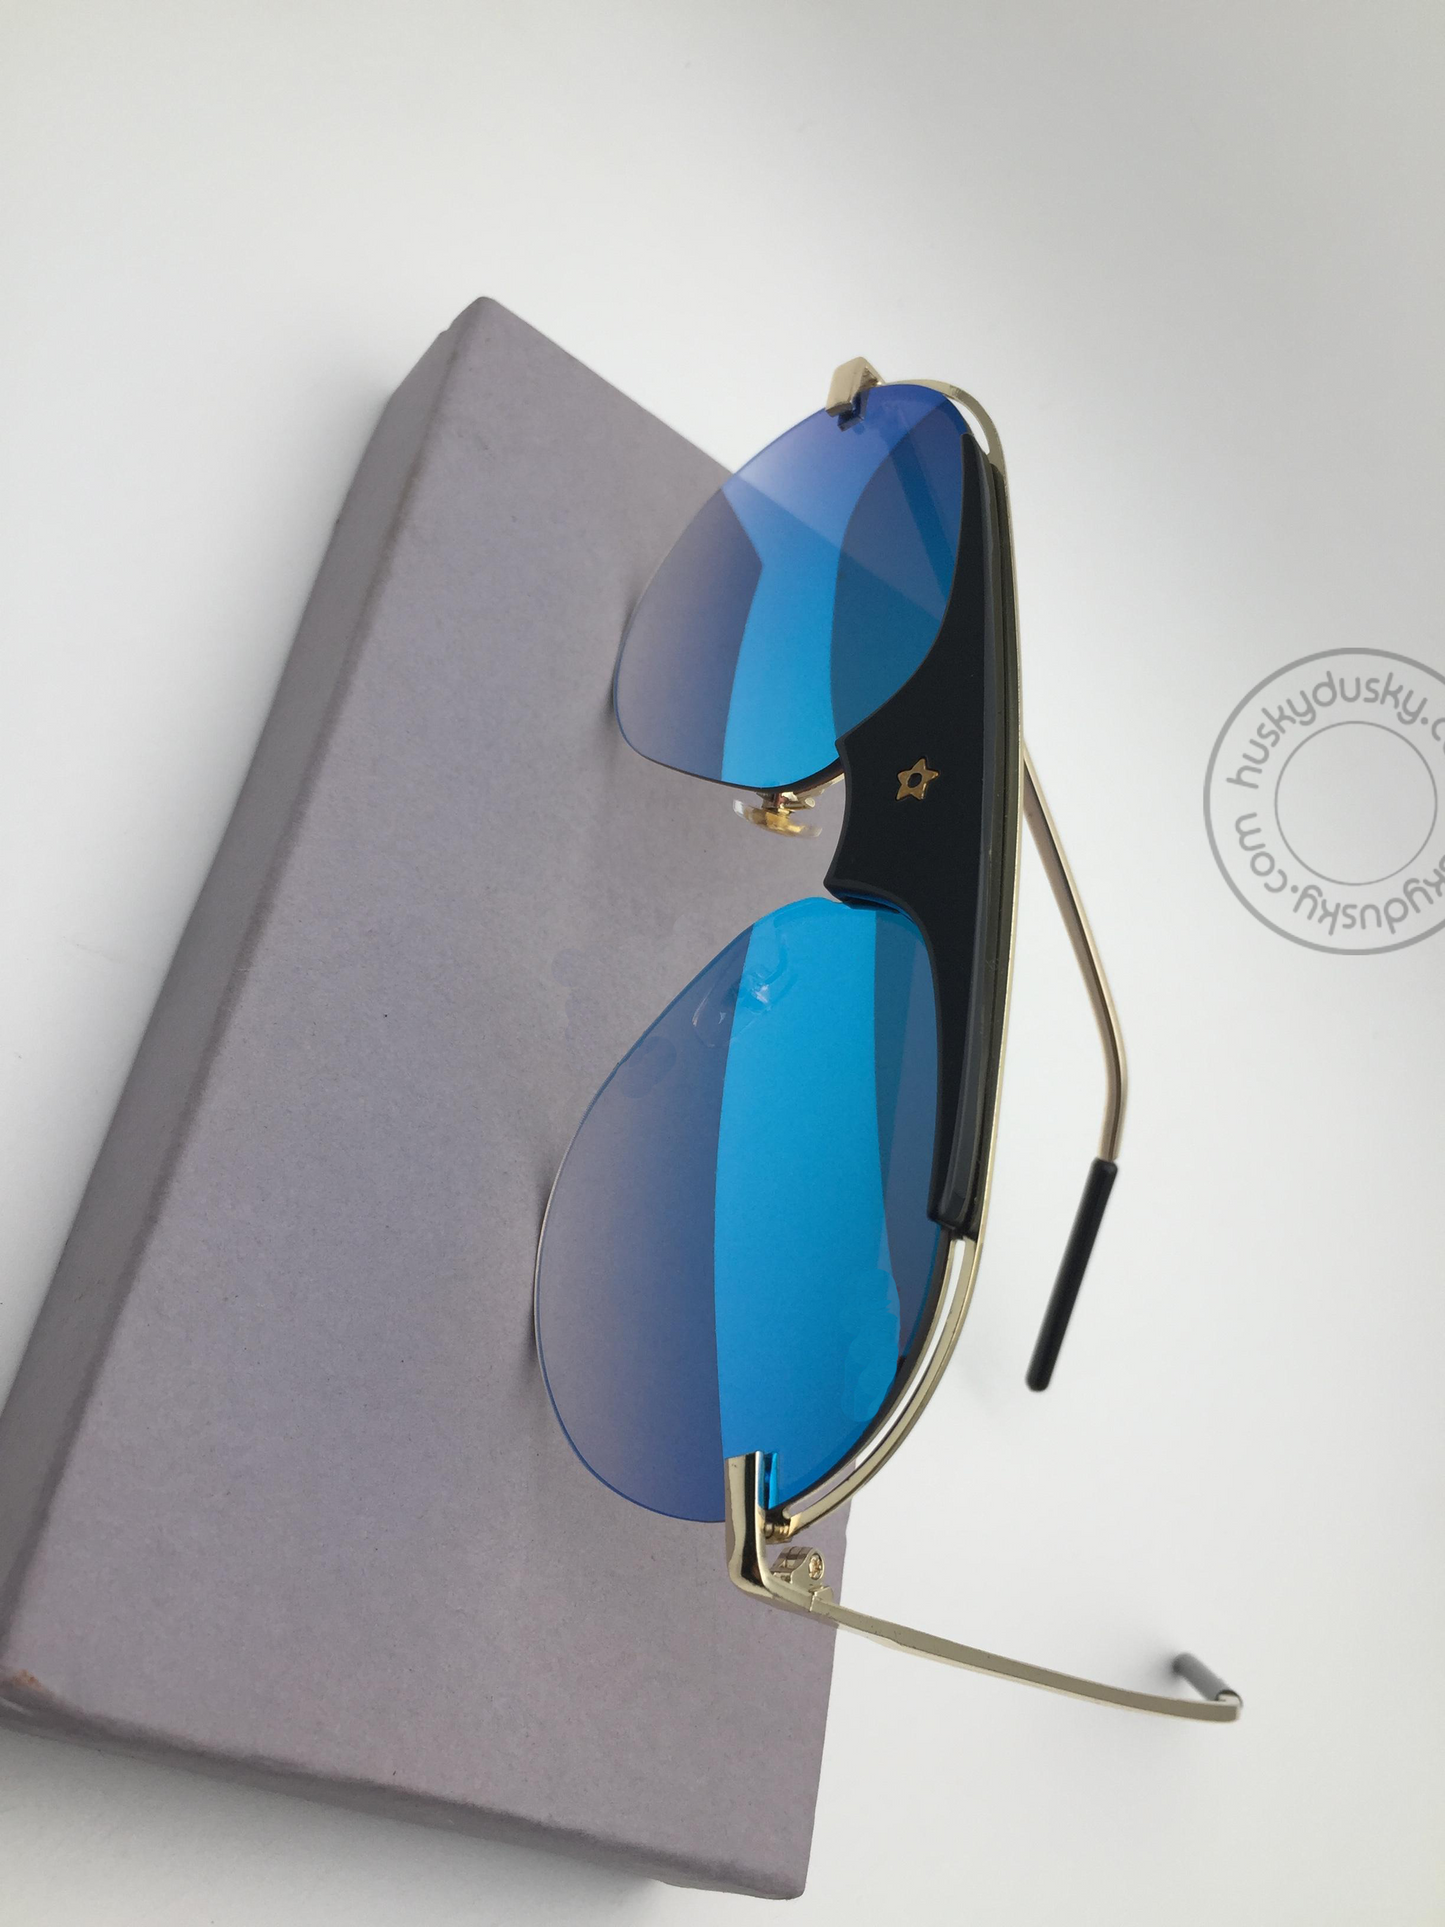 Dior Blue Color Glass Men's Sunglass for Man Woman or Girl DR-GOLD-BLUE Gold Stick Frame Gift Sunglass